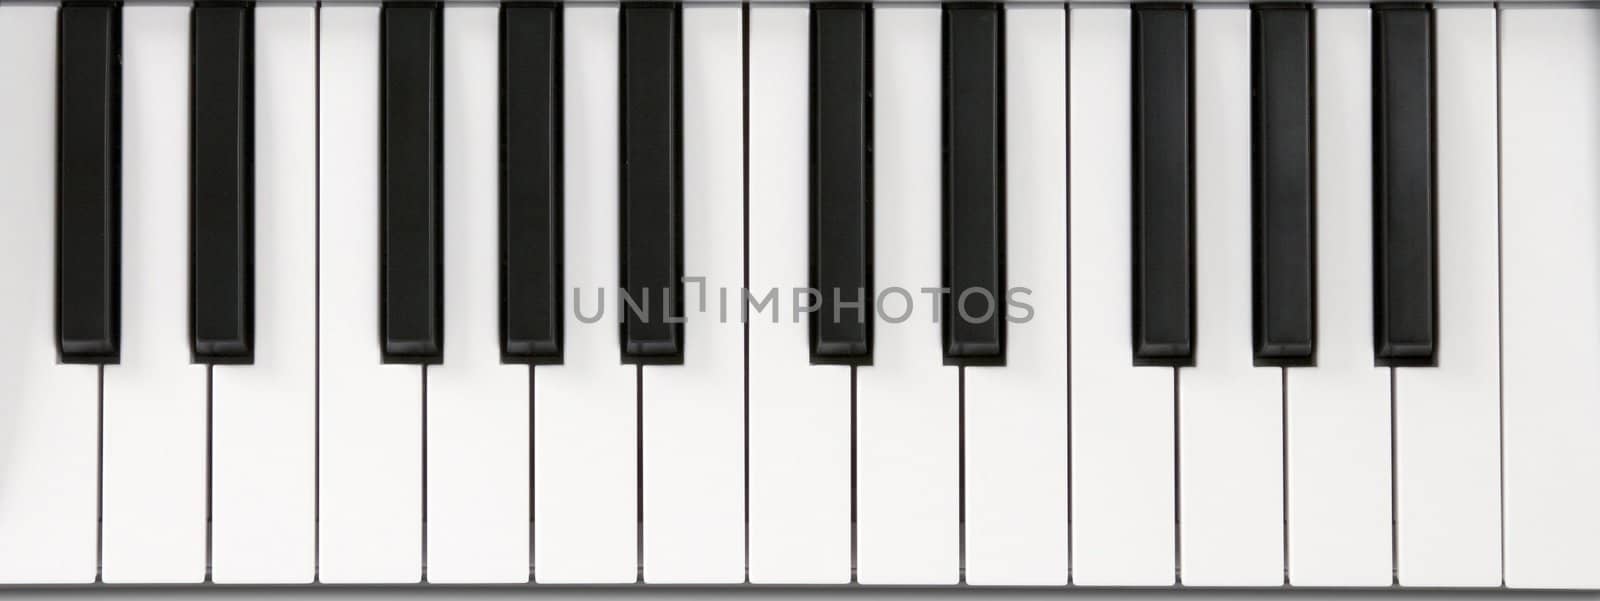 Piano keyboard close-up isolated music astract arrangement